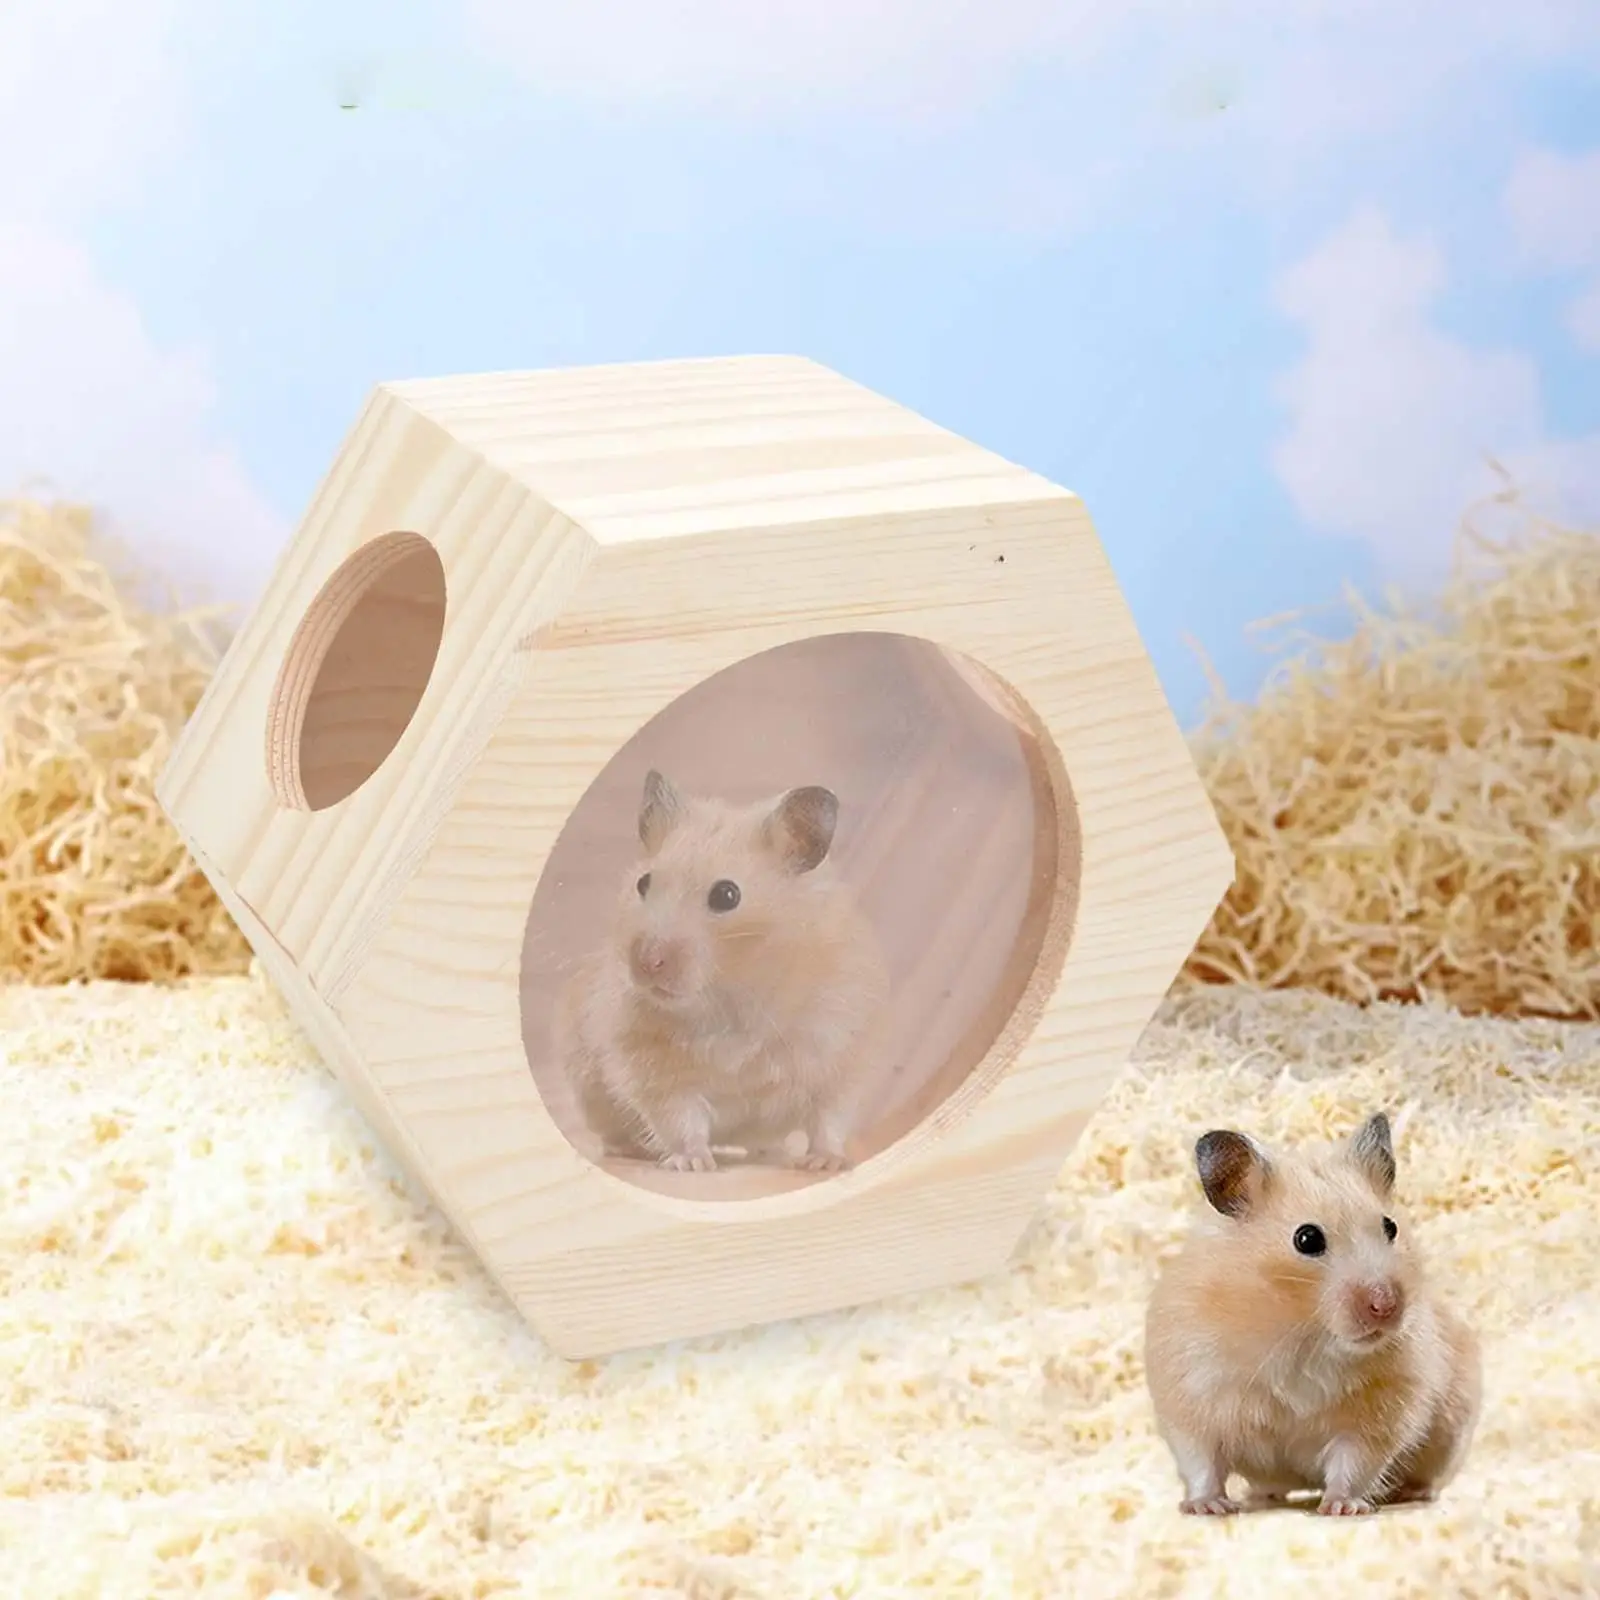 Wooden Hamster House Hangable Hut Decor Hide Supplies Chew Cage Toy Hexagonal Box for Guinea Pig Hamster Mice Lemmings Gerbils